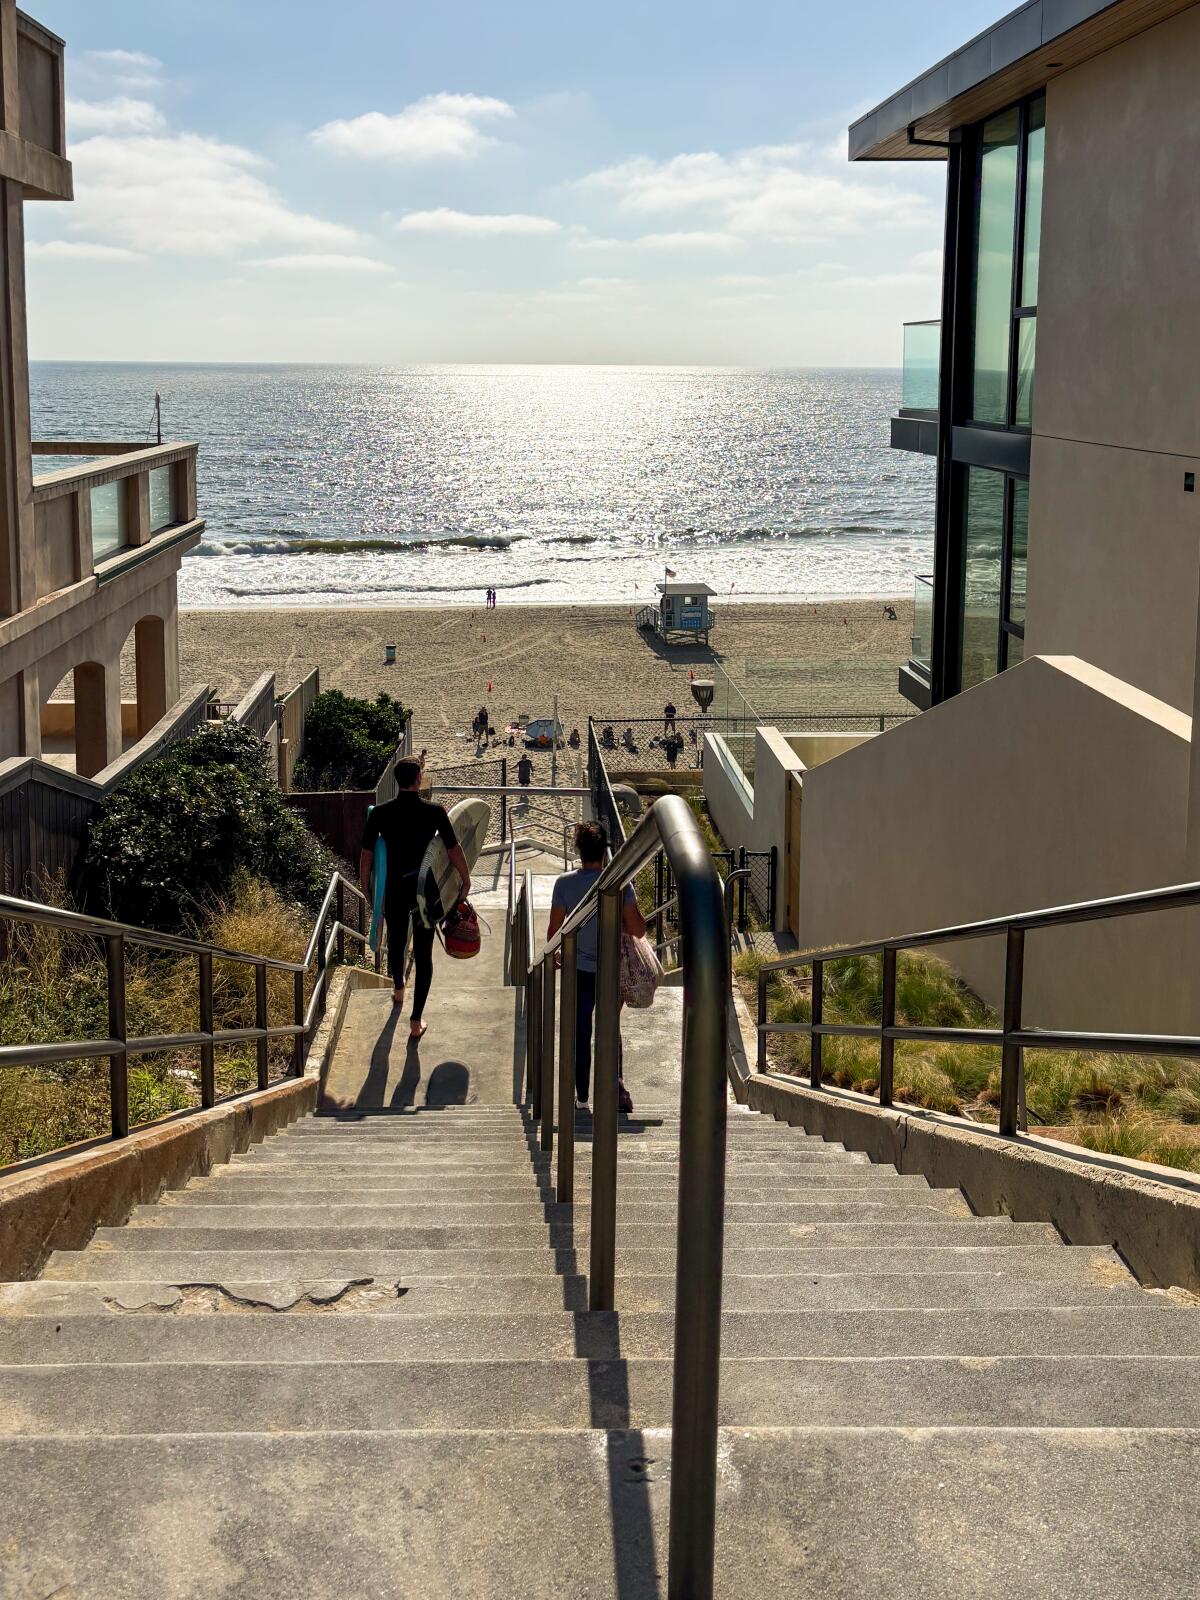 A stairway splits two buildings, leading to the beach and ocean.